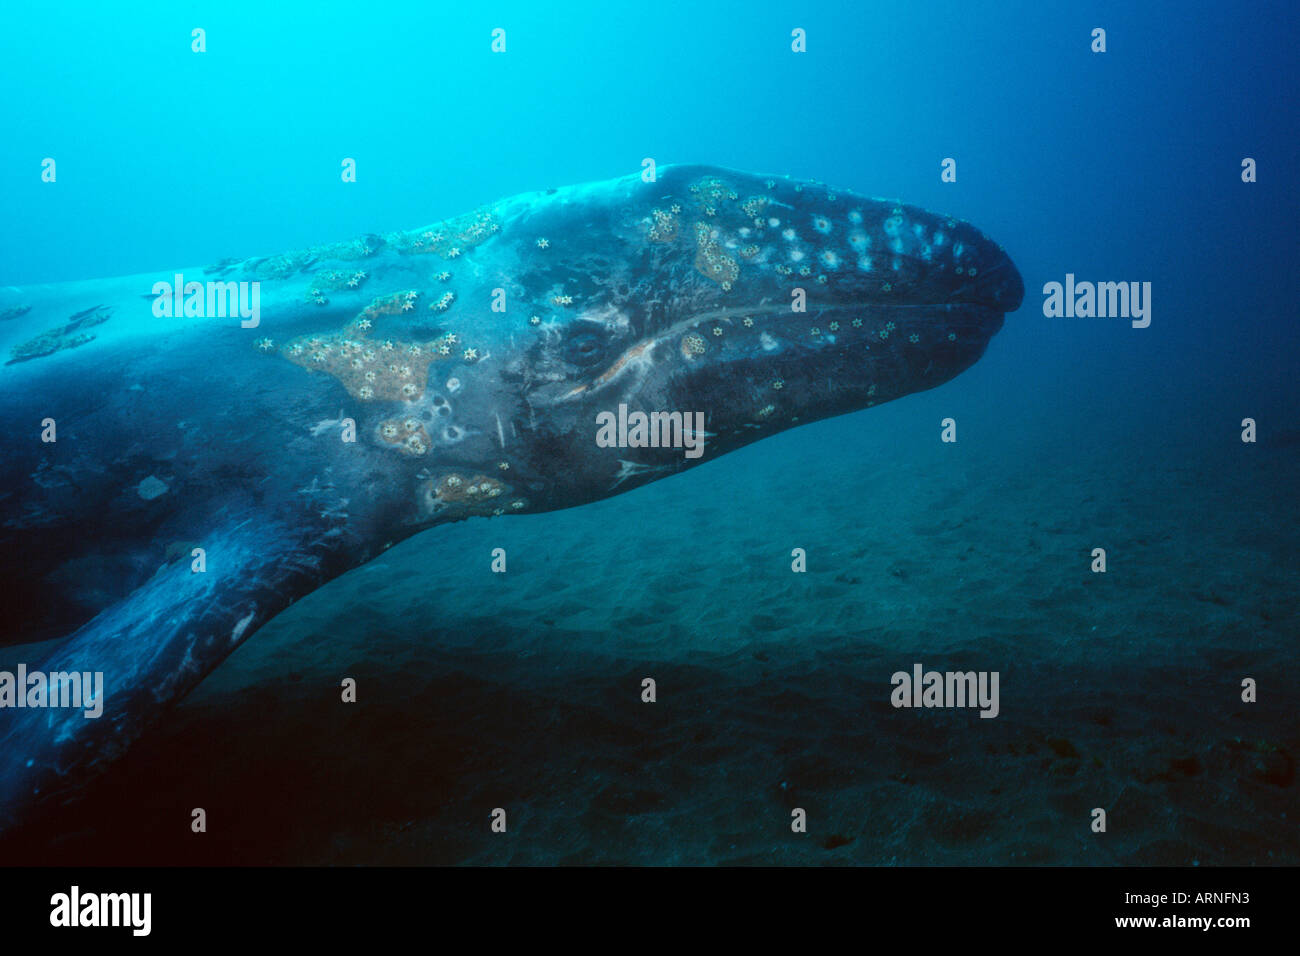 Gray whale Eschrichtius robustus is found in the Pacific ocean They grow to be 50 feet long They travel 10 000 miles each year the longest known mammal migration California Pacific Ocean Stock Photo